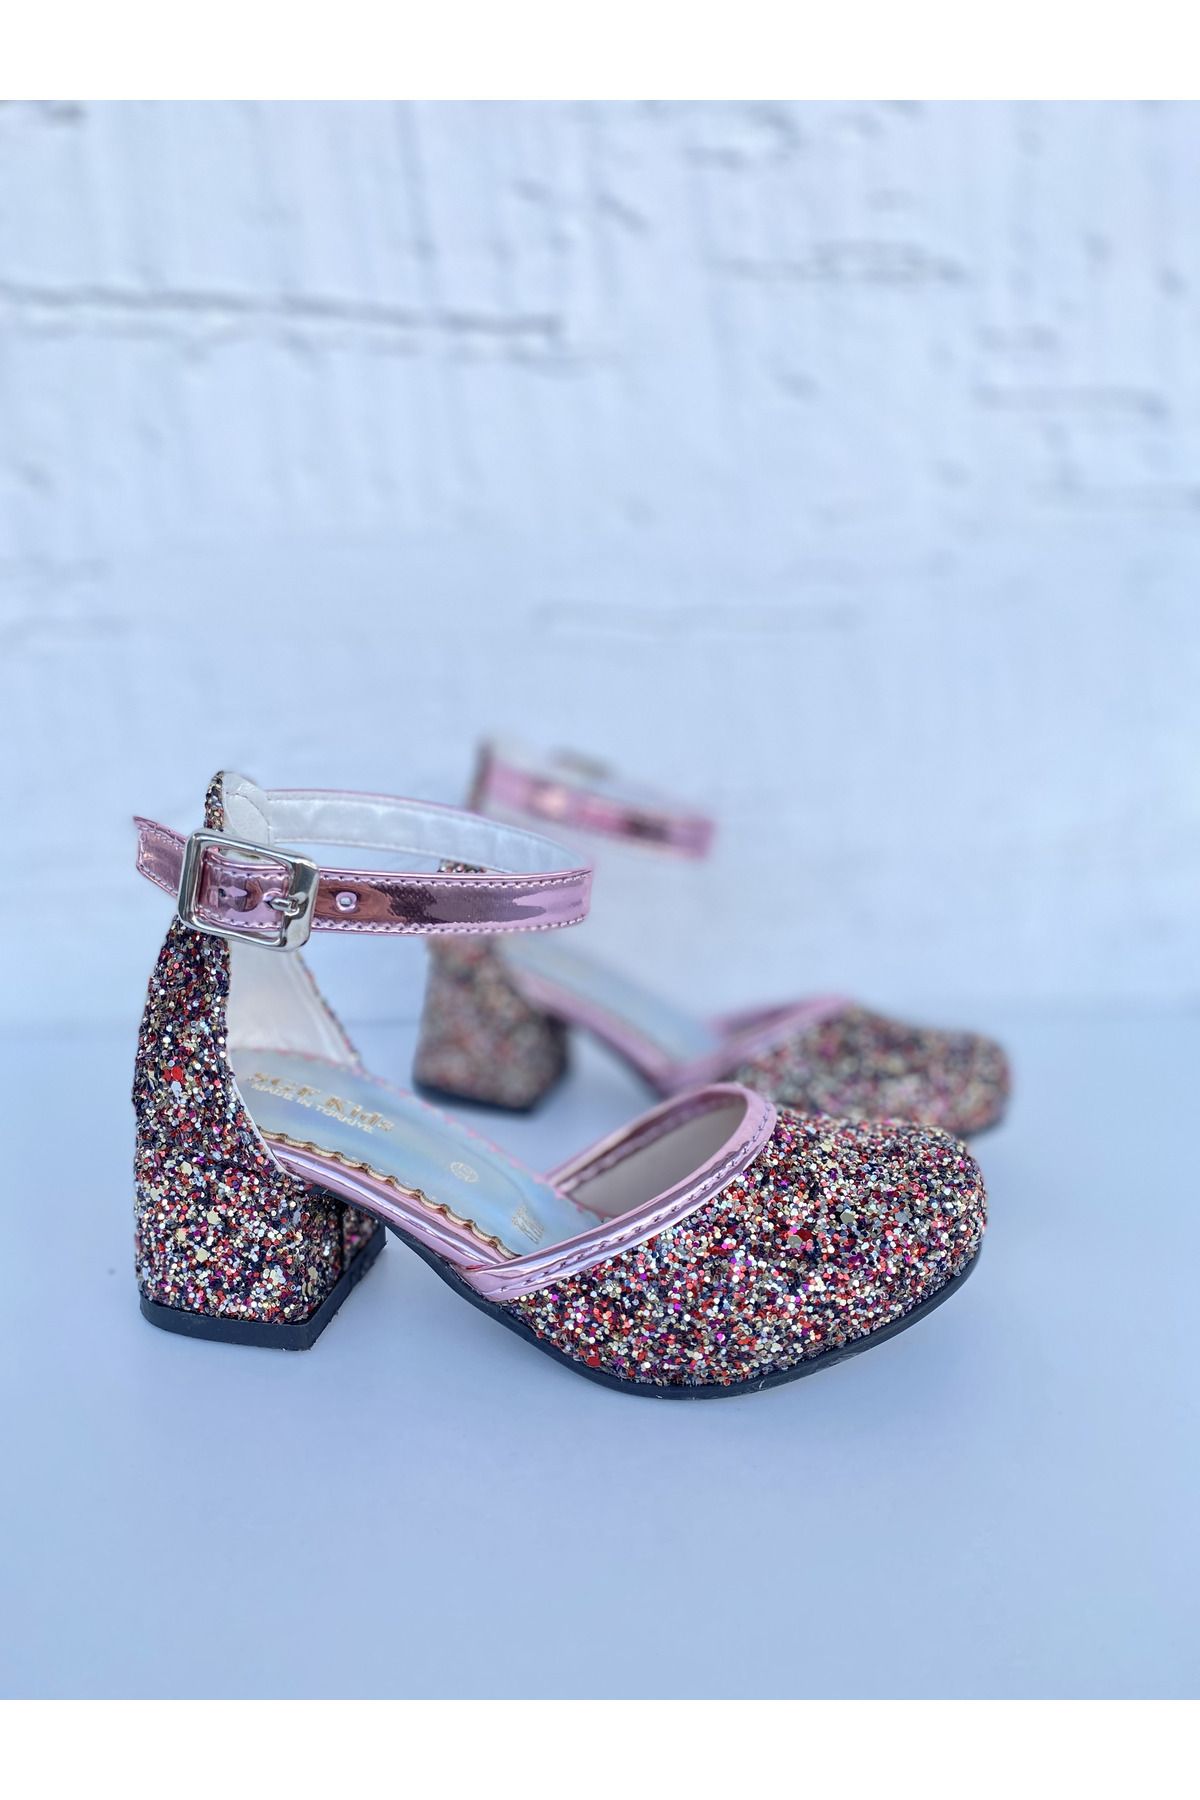 Girls Spot On Heeled Sparkly Dolly Shoes | eBay